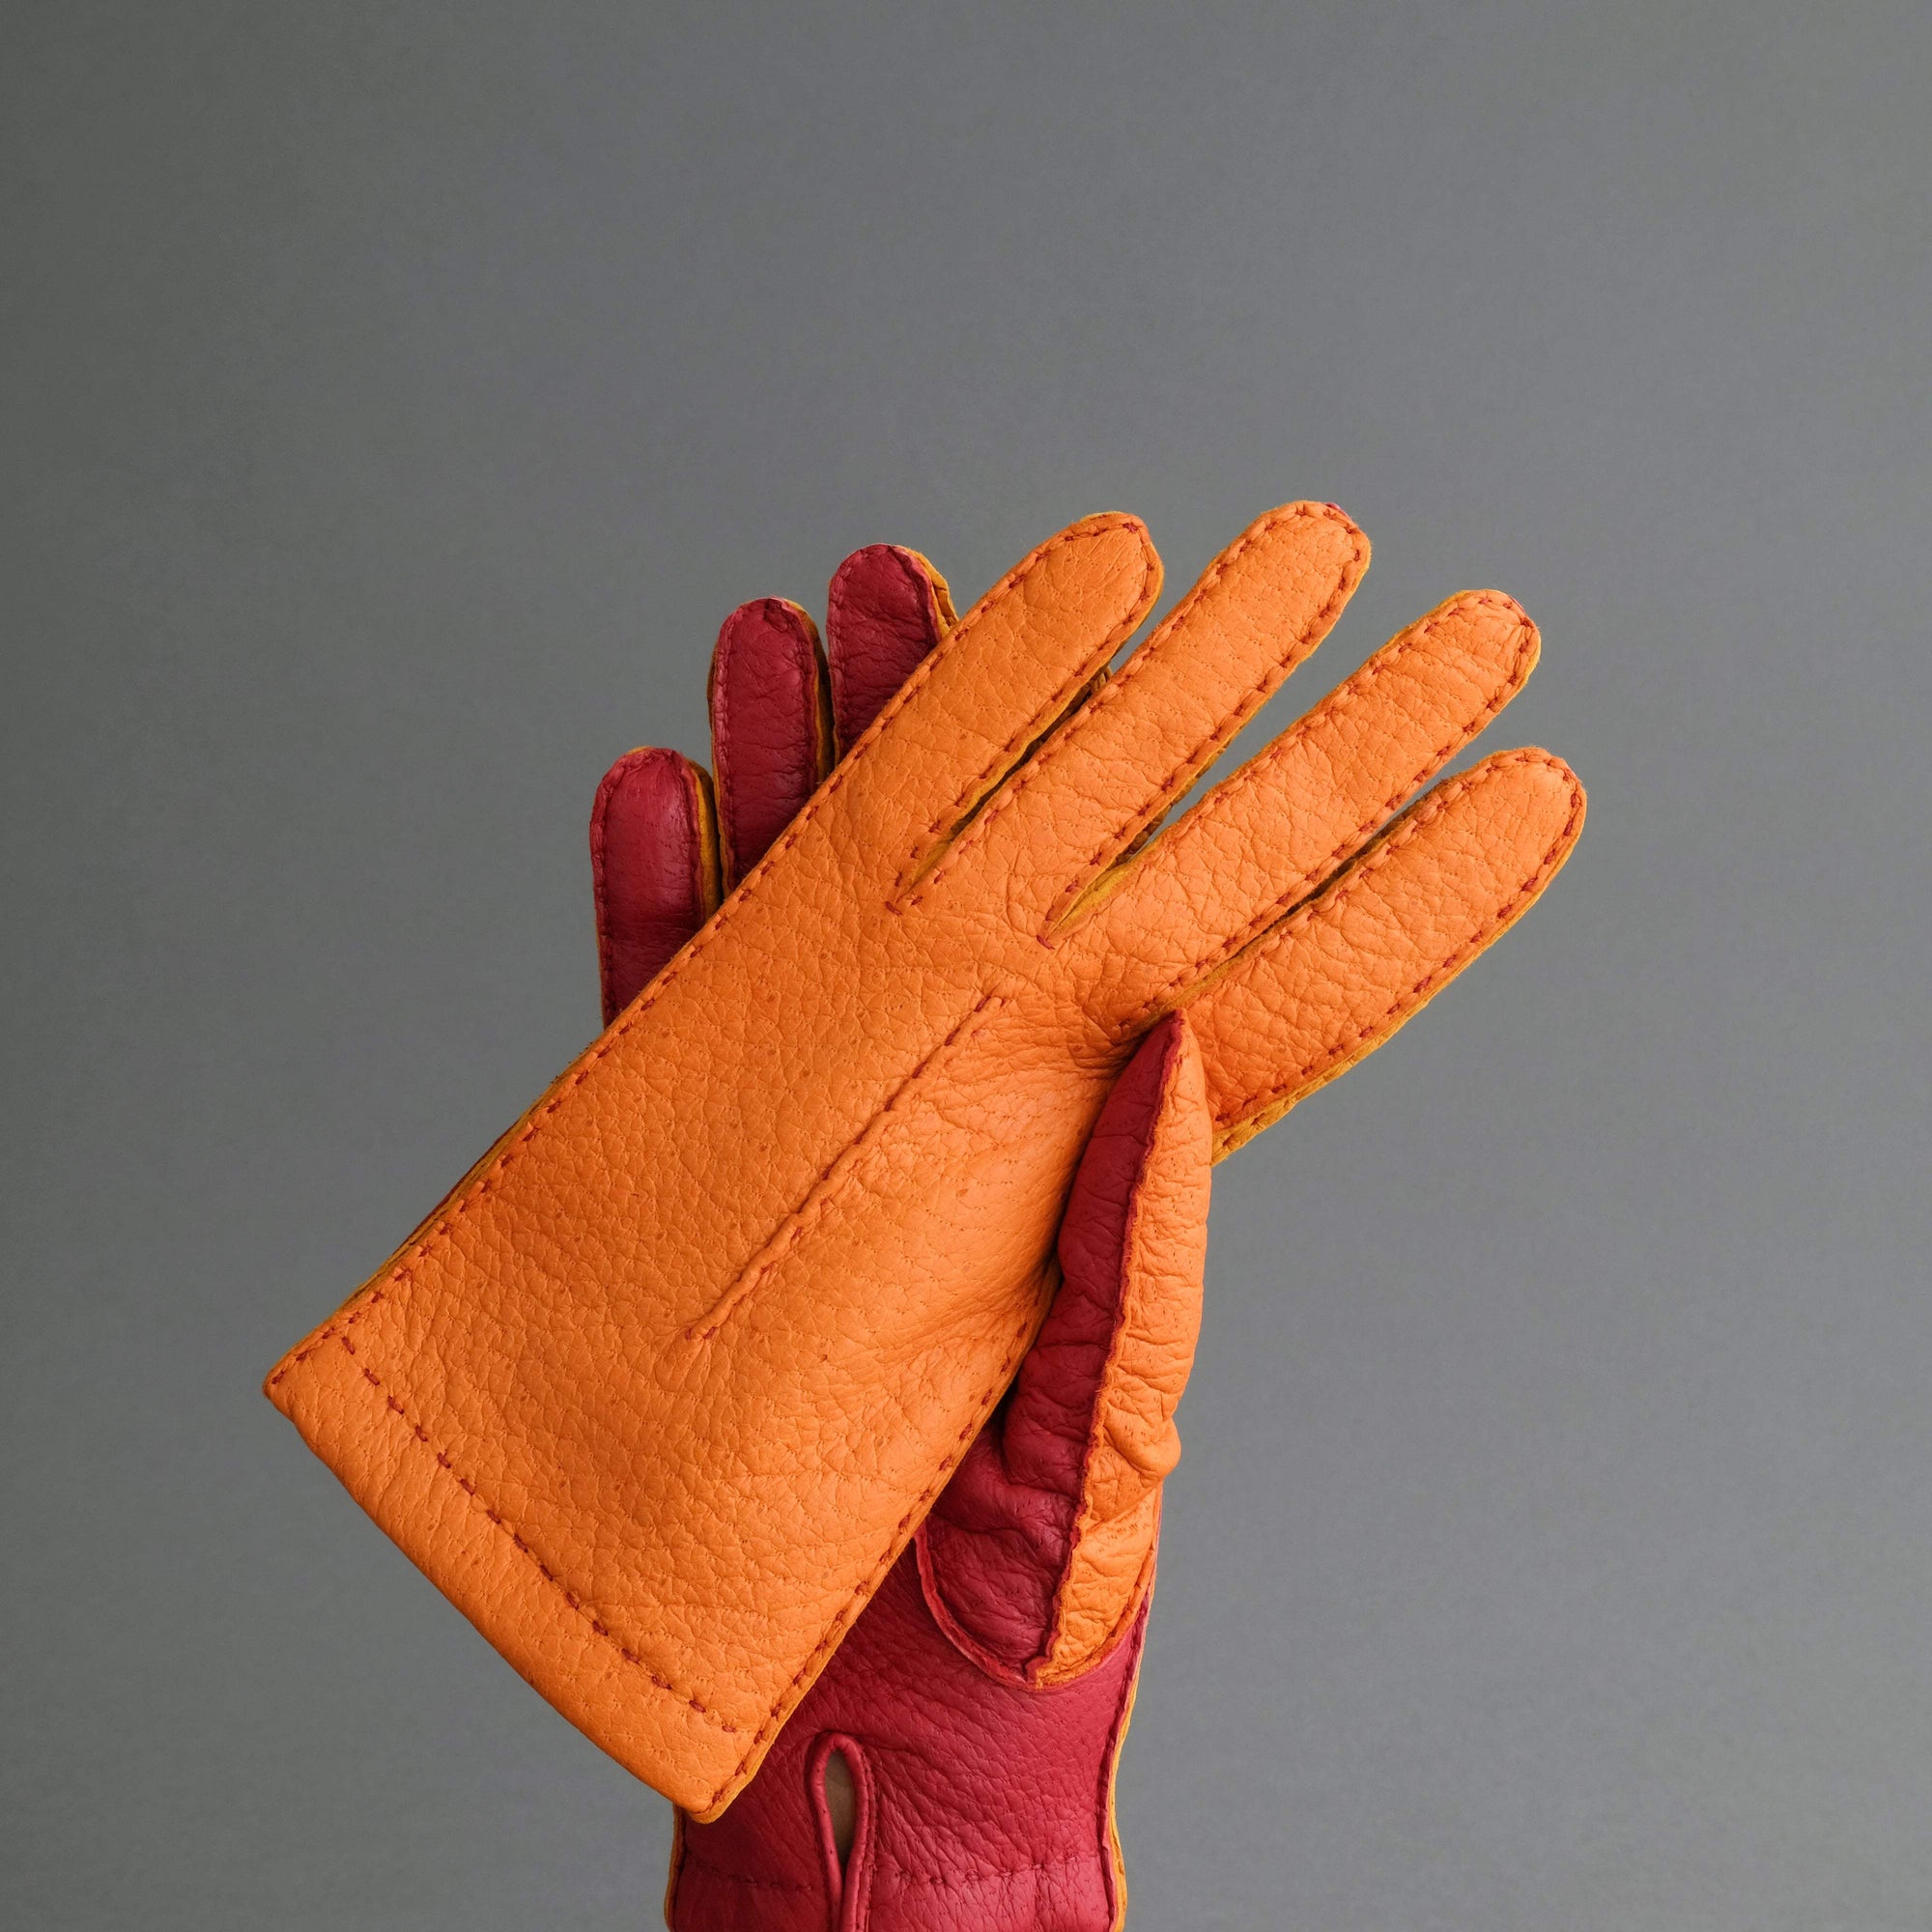 Ladies Gloves from Orange, Red and Yellow Peccary - TR Handschuhe Wien - Thomas Riemer Handmade Gloves